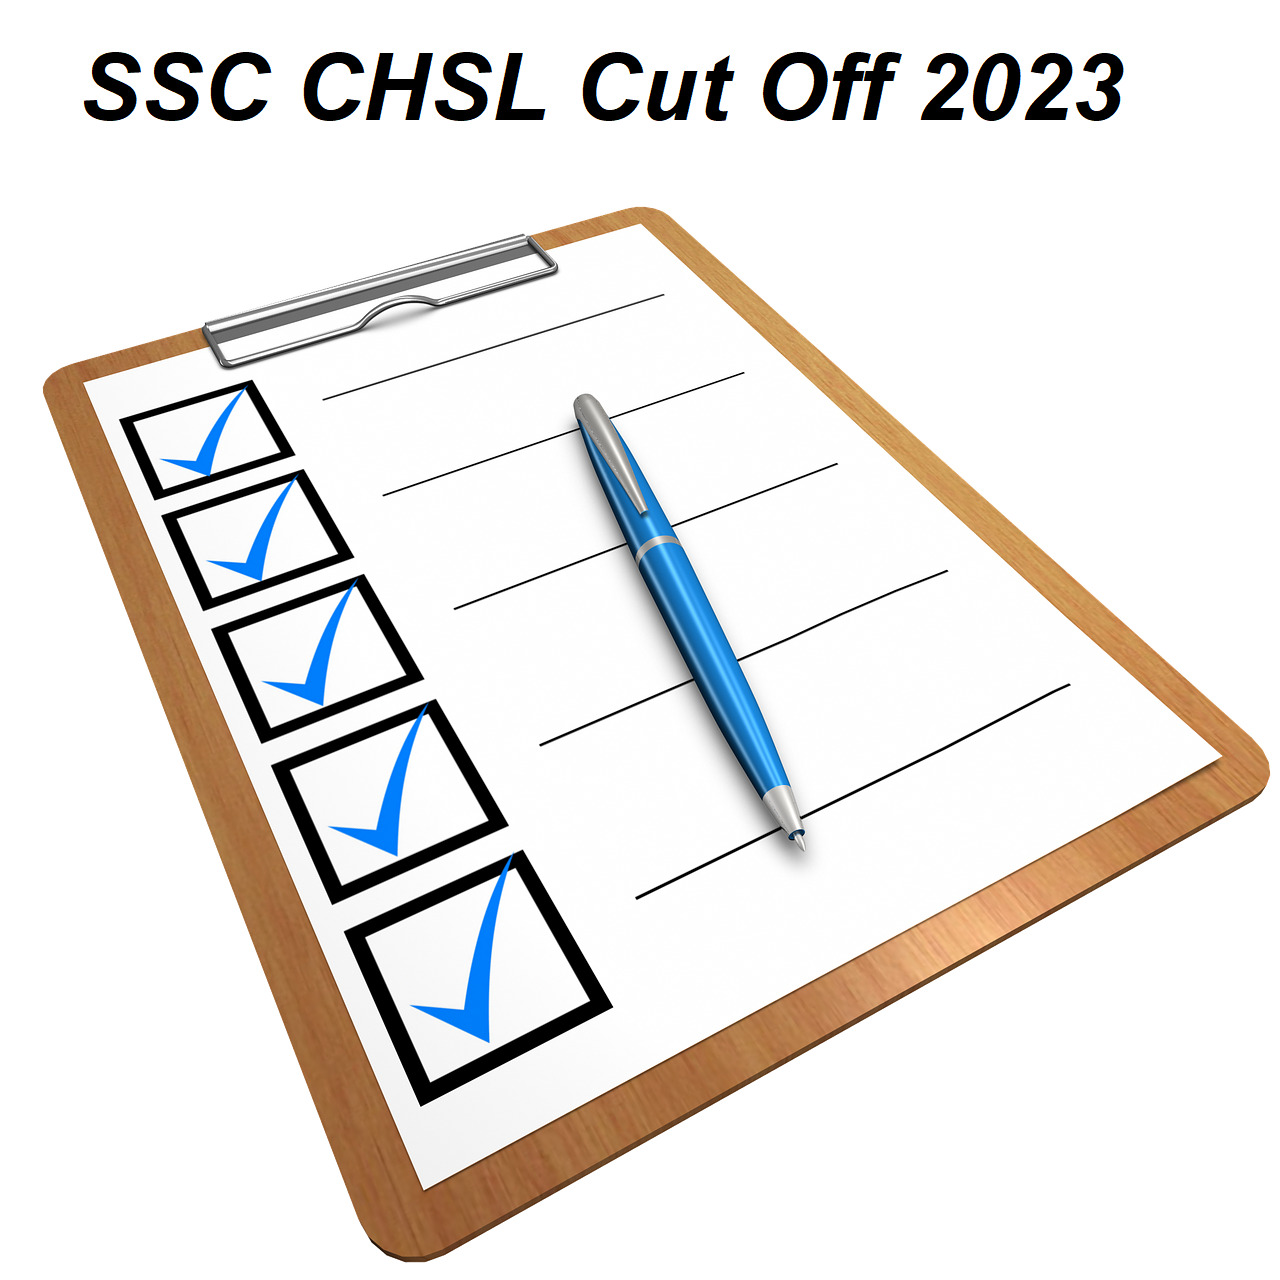 SSC CHSL Cut-Off - Check Category-Wise Cut- Off Here